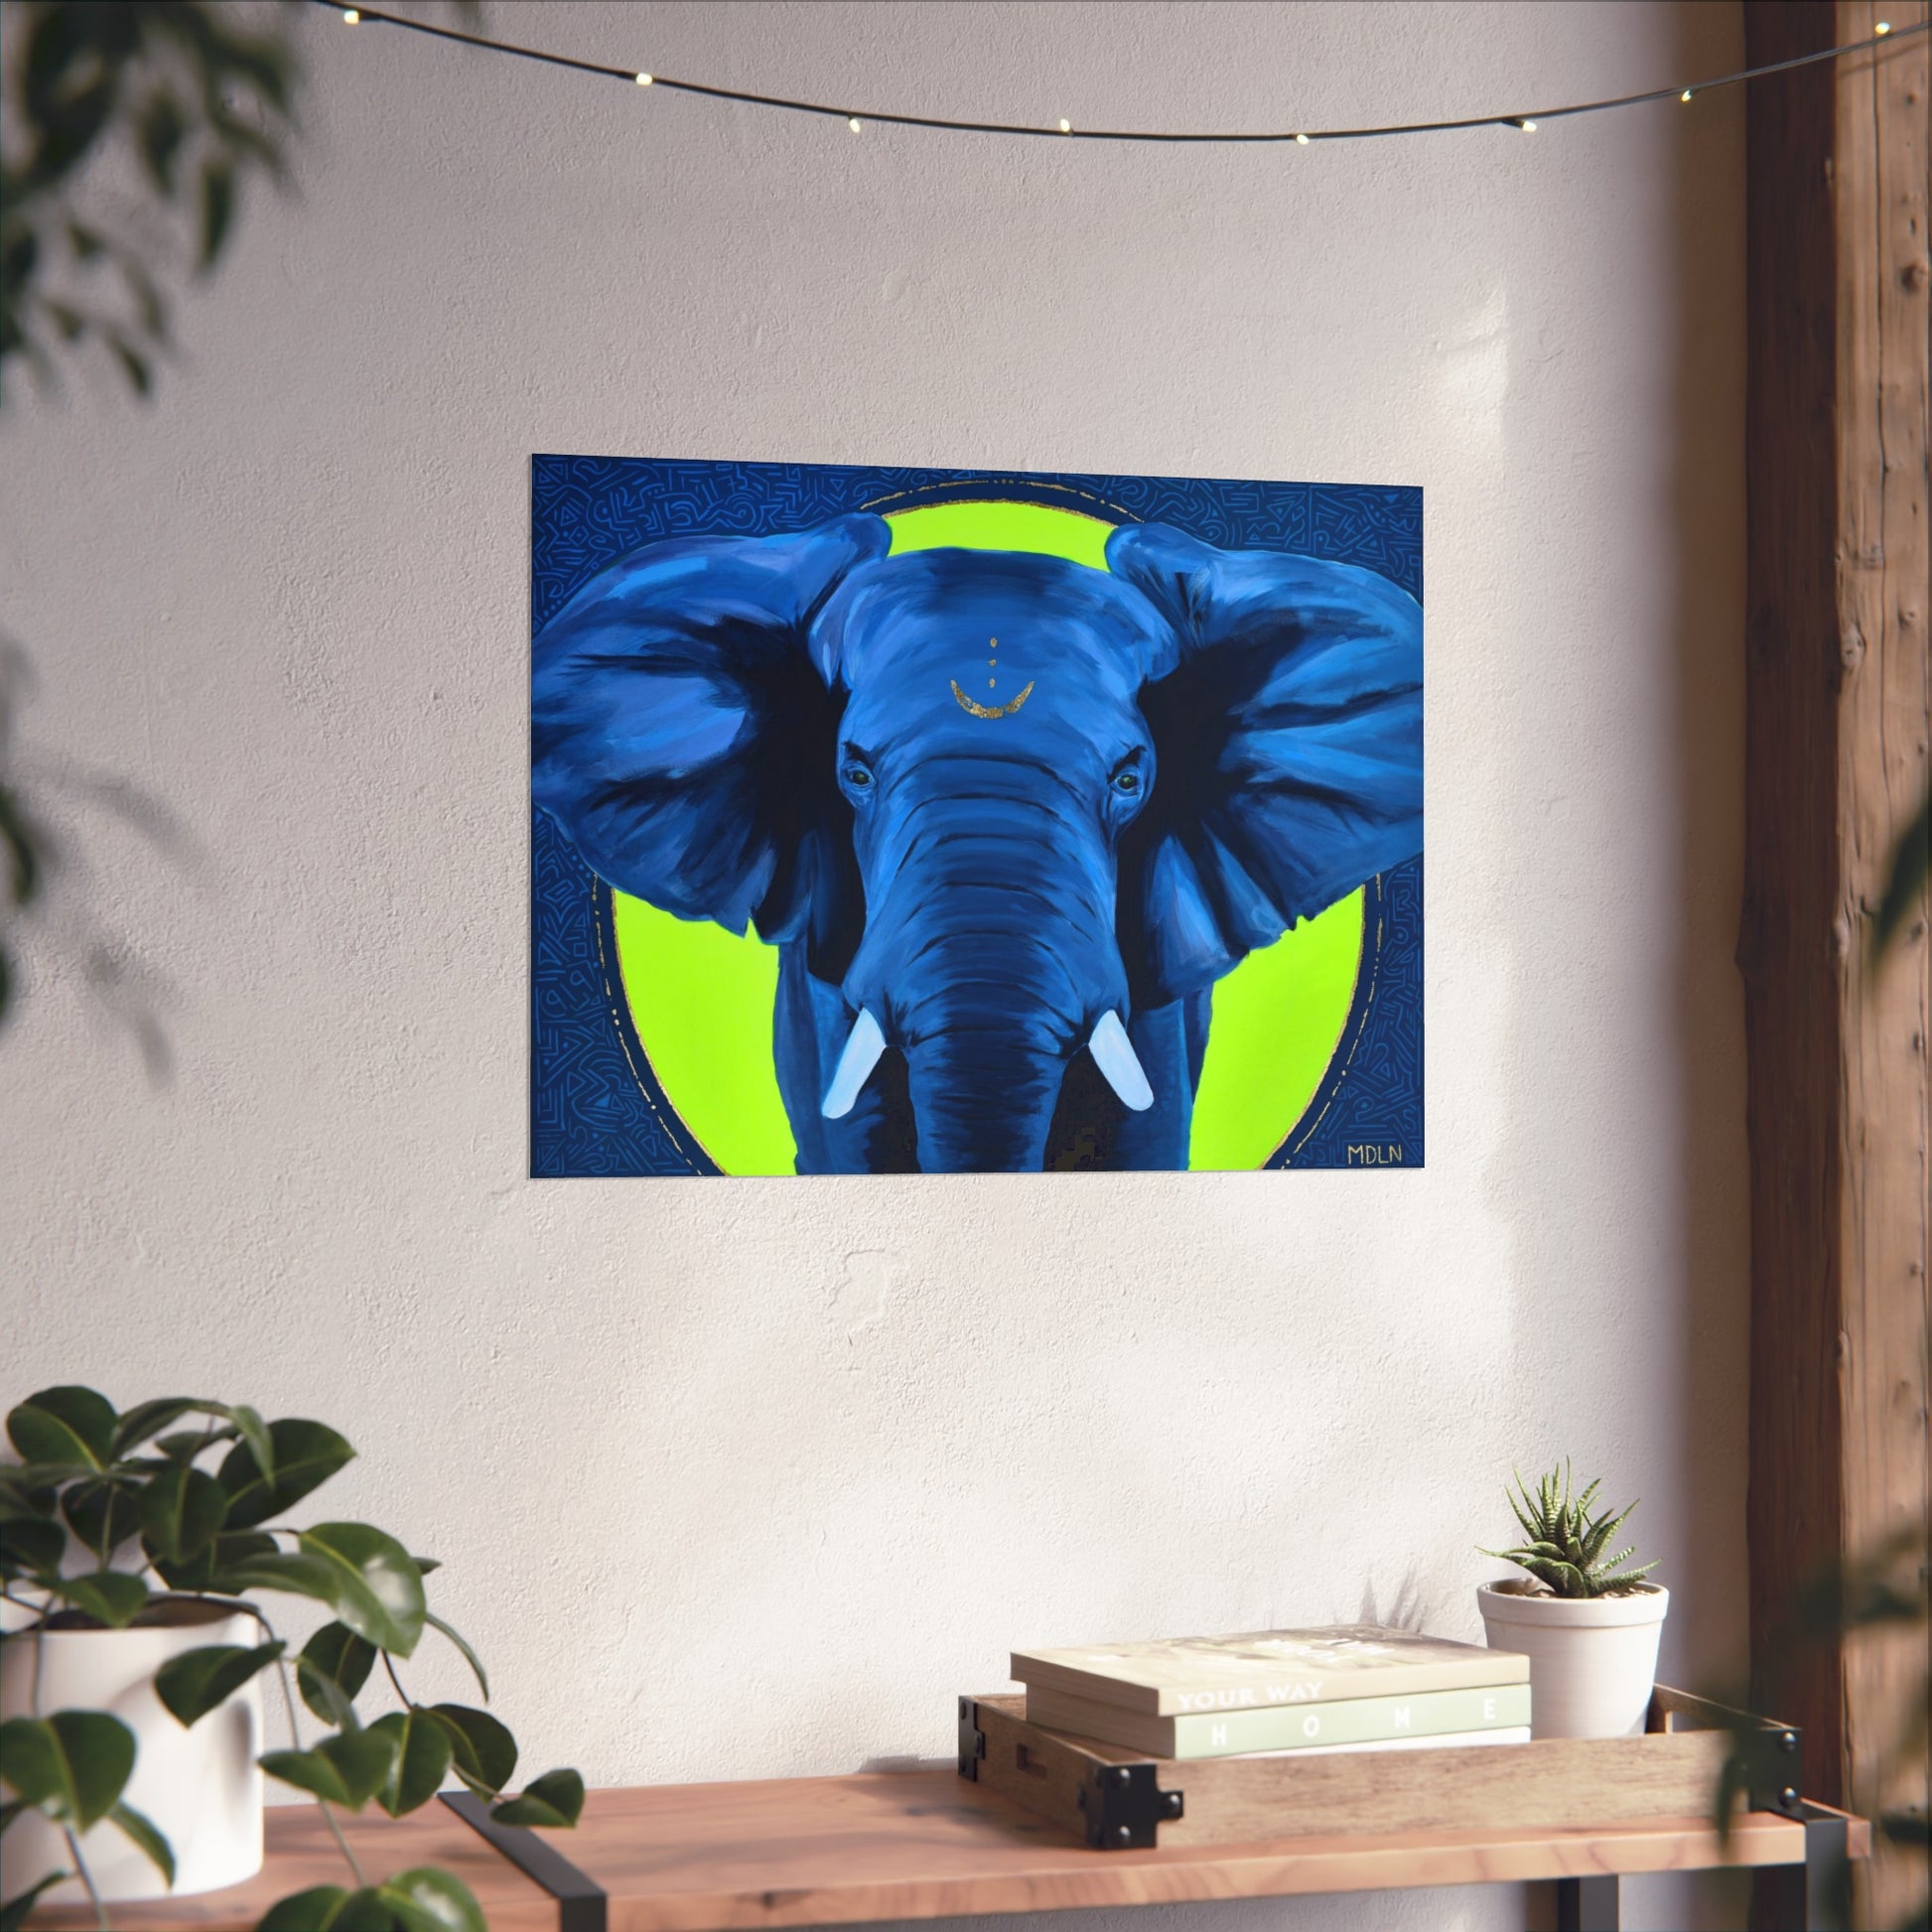 A blue and yellow African Elephant art print hanging on the wall over a console table